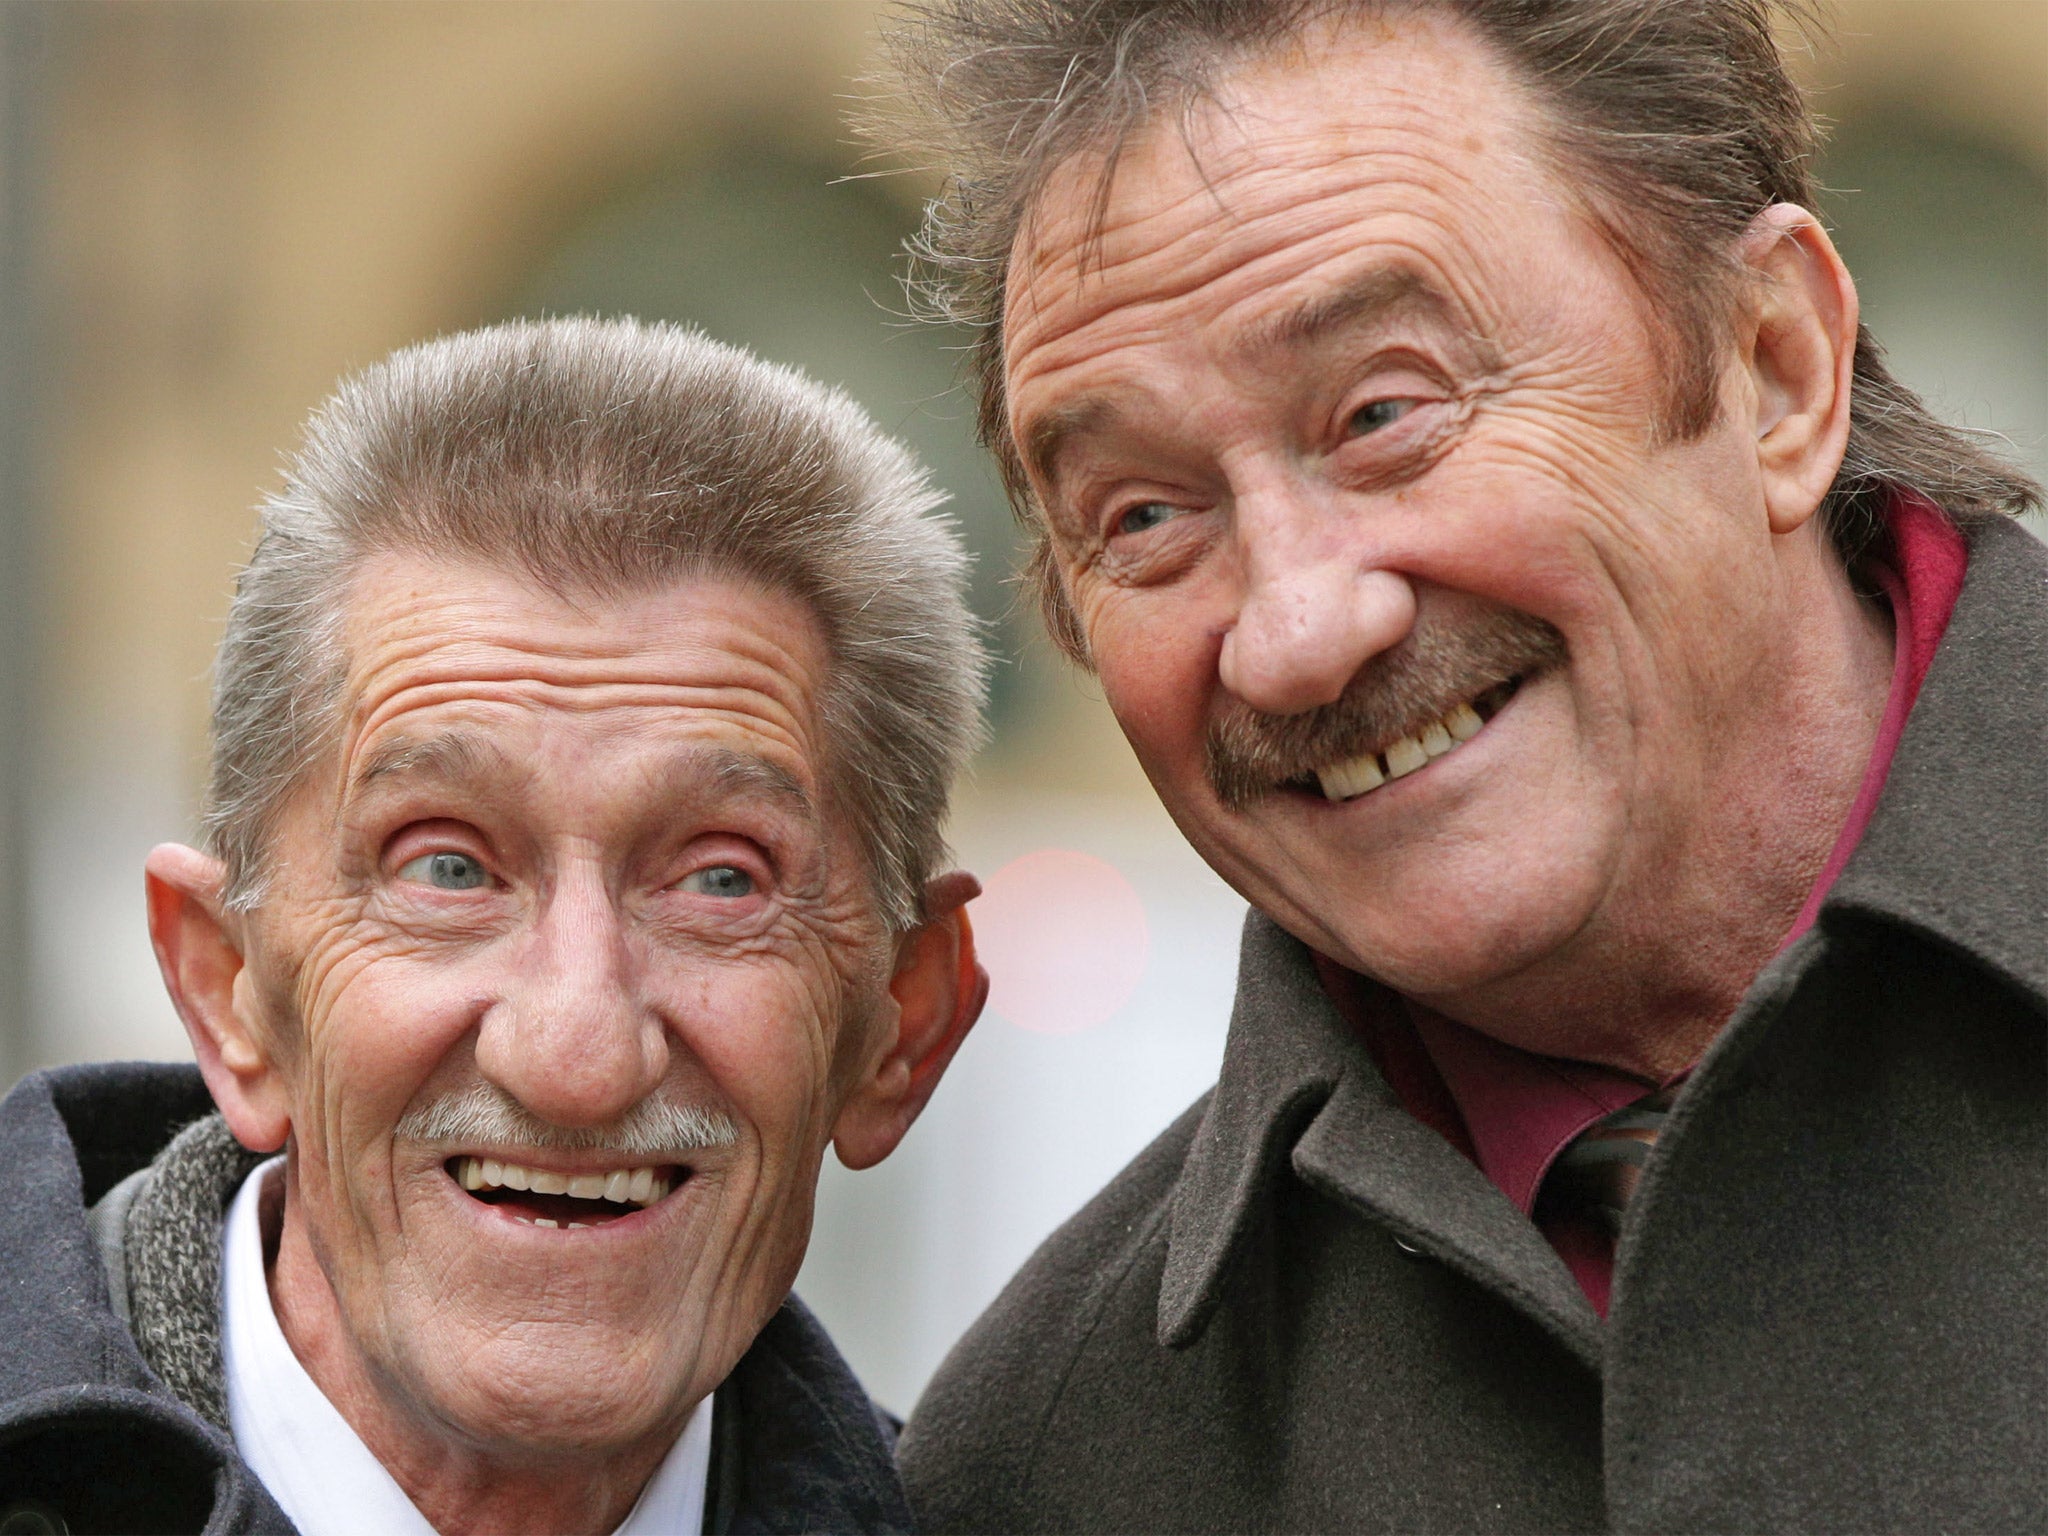 The Chuckle brothers outside Southwark Crown Court earlier this week